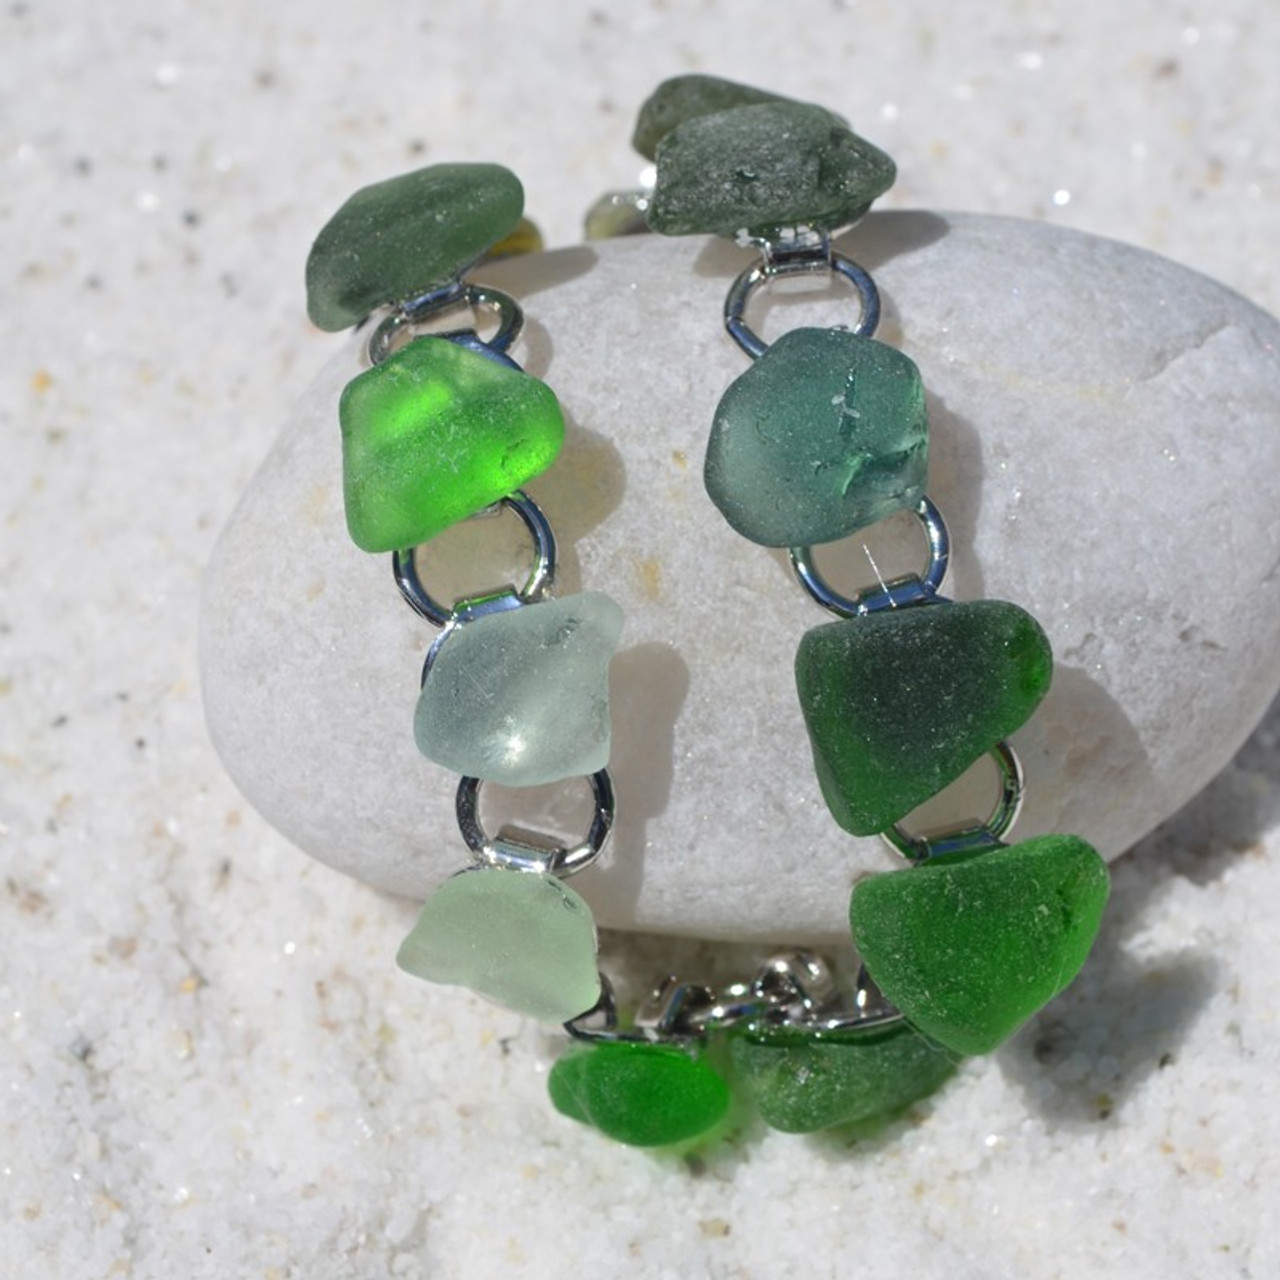 Surf Tumbled Sea Glass in a Variety of Colors on a Bracelet - 3 Size ...